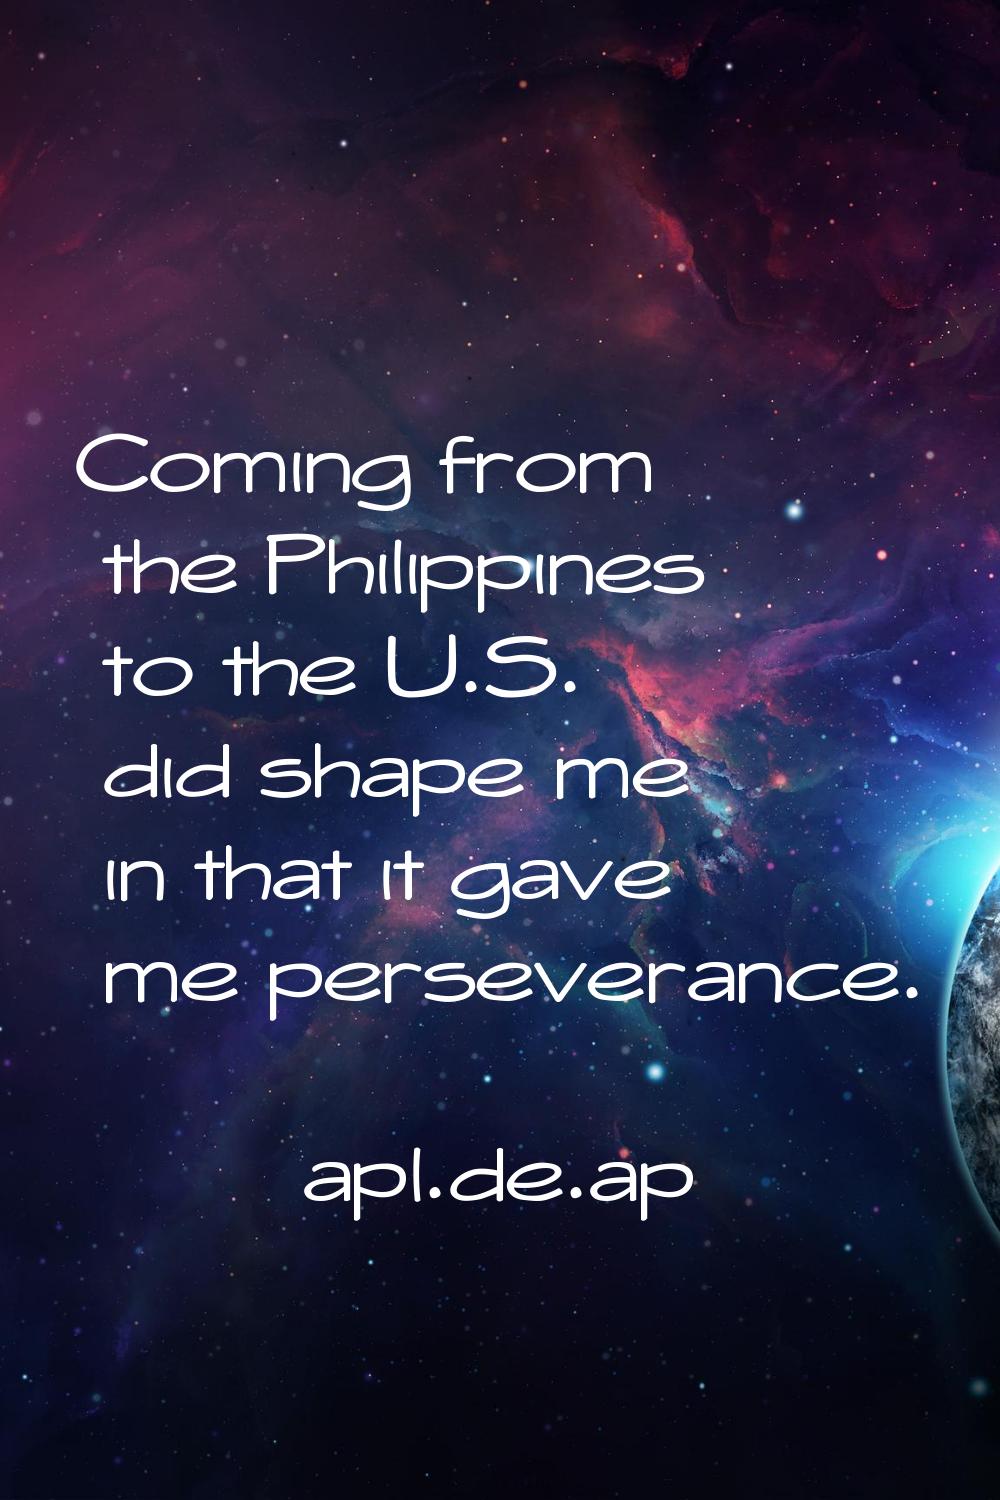 Coming from the Philippines to the U.S. did shape me in that it gave me perseverance.